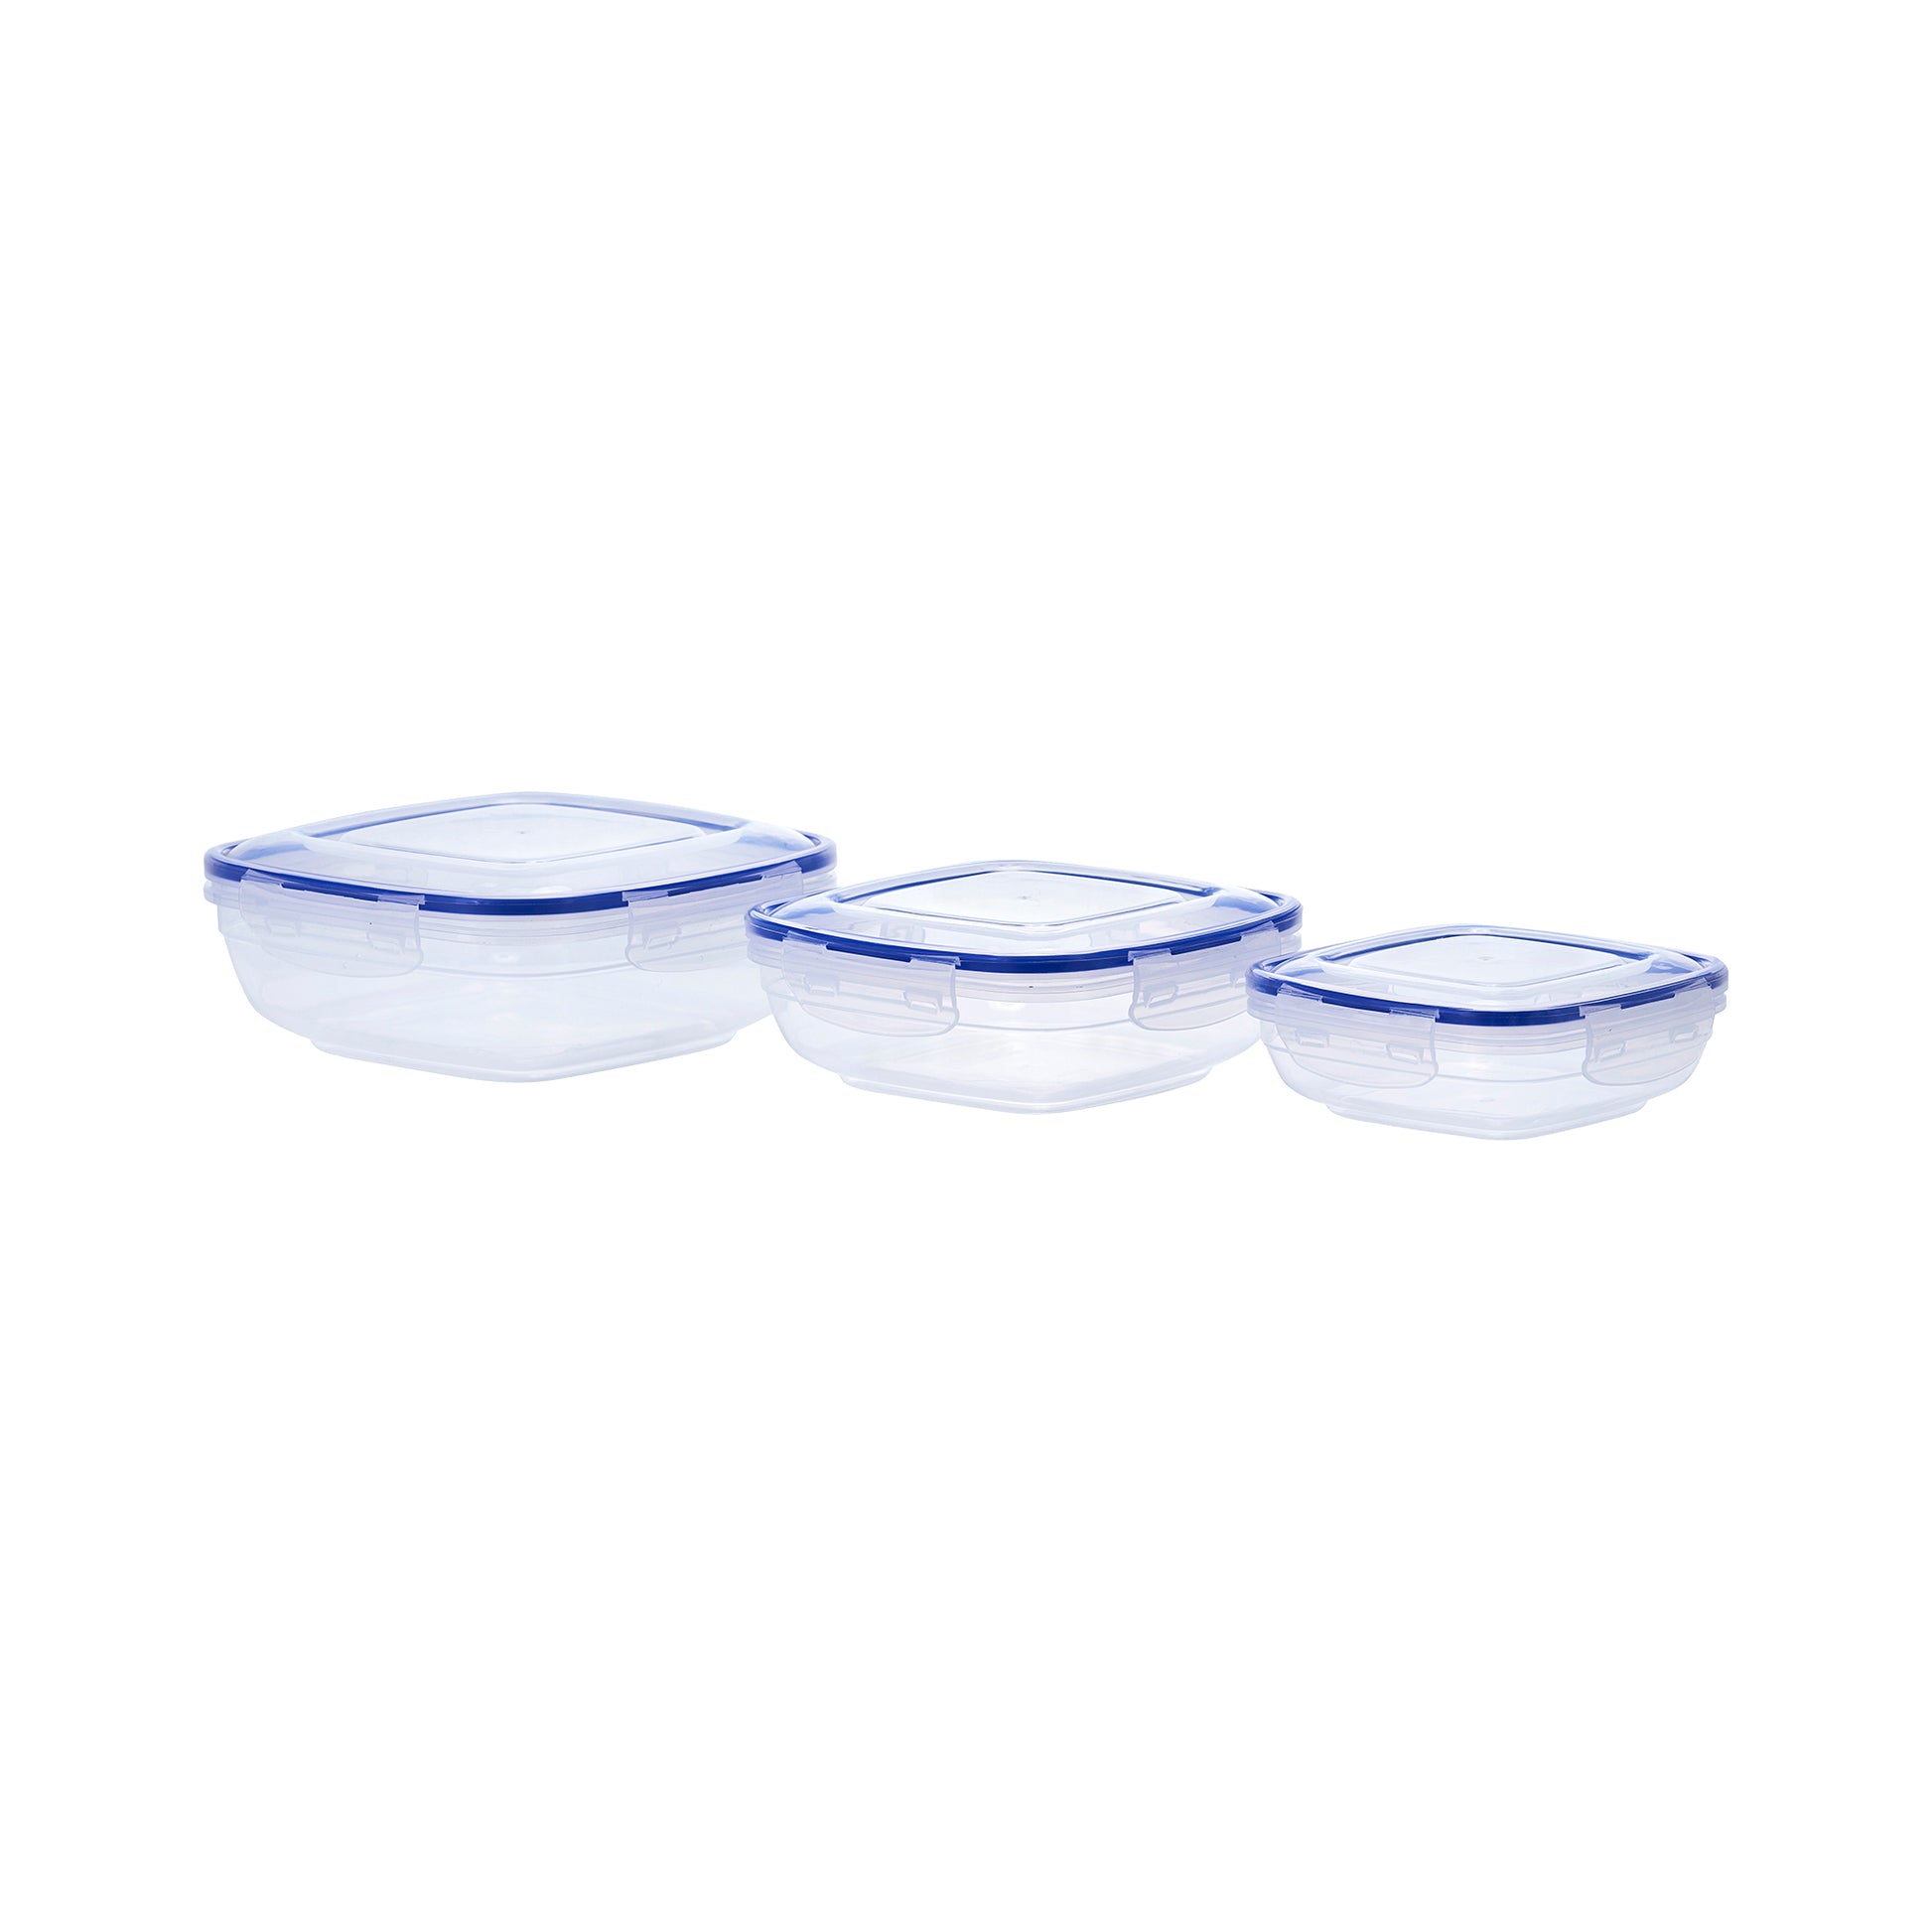 Superio Food Storage Containers, Airtight Leak-Proof Meal Prep Square